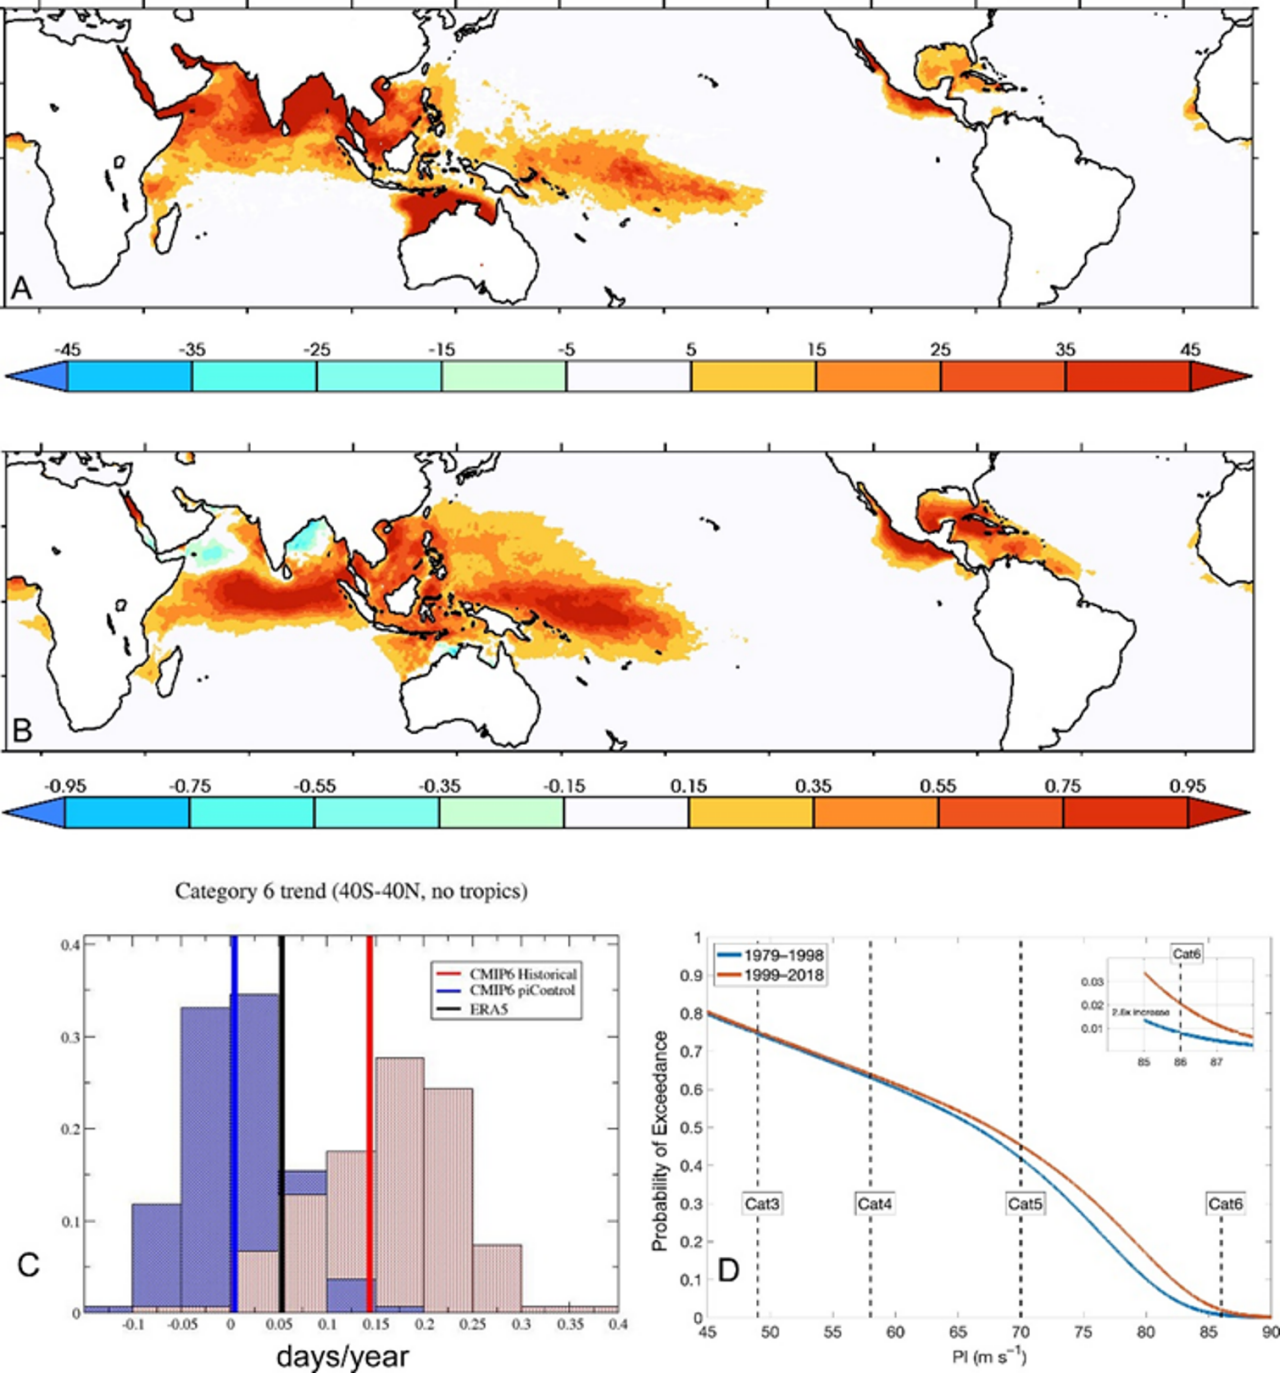 Figure 1: Figure 2 from Kossin and Wehner (2024) - (A) ERA5 1979 to 2019 average annual exceedance of category 6 wind speed threshold. Units: days. (B) Linear rate of change in ERA5 average annual exceedance of category 6 wind speed threshold from 1979 to 2019. Units: days per year. (C) Linear trends in average annual exceedance of the category 6 wind speed threshold from 1979 to 2019 averaged over 40S to 40N excluding 10S to 10N. blue: CMIP6 historical, red: CMIP6 piControl, black: ERA5 reanalysis. (D) Increase in the tail of the potential intensity distribution indicating a 2.6× increase in the chances of potential intensity exceeding category 6 from the first half of the ERA5 reanalysis to its second half over the region 40S to 40N excluding 10S to 10N.